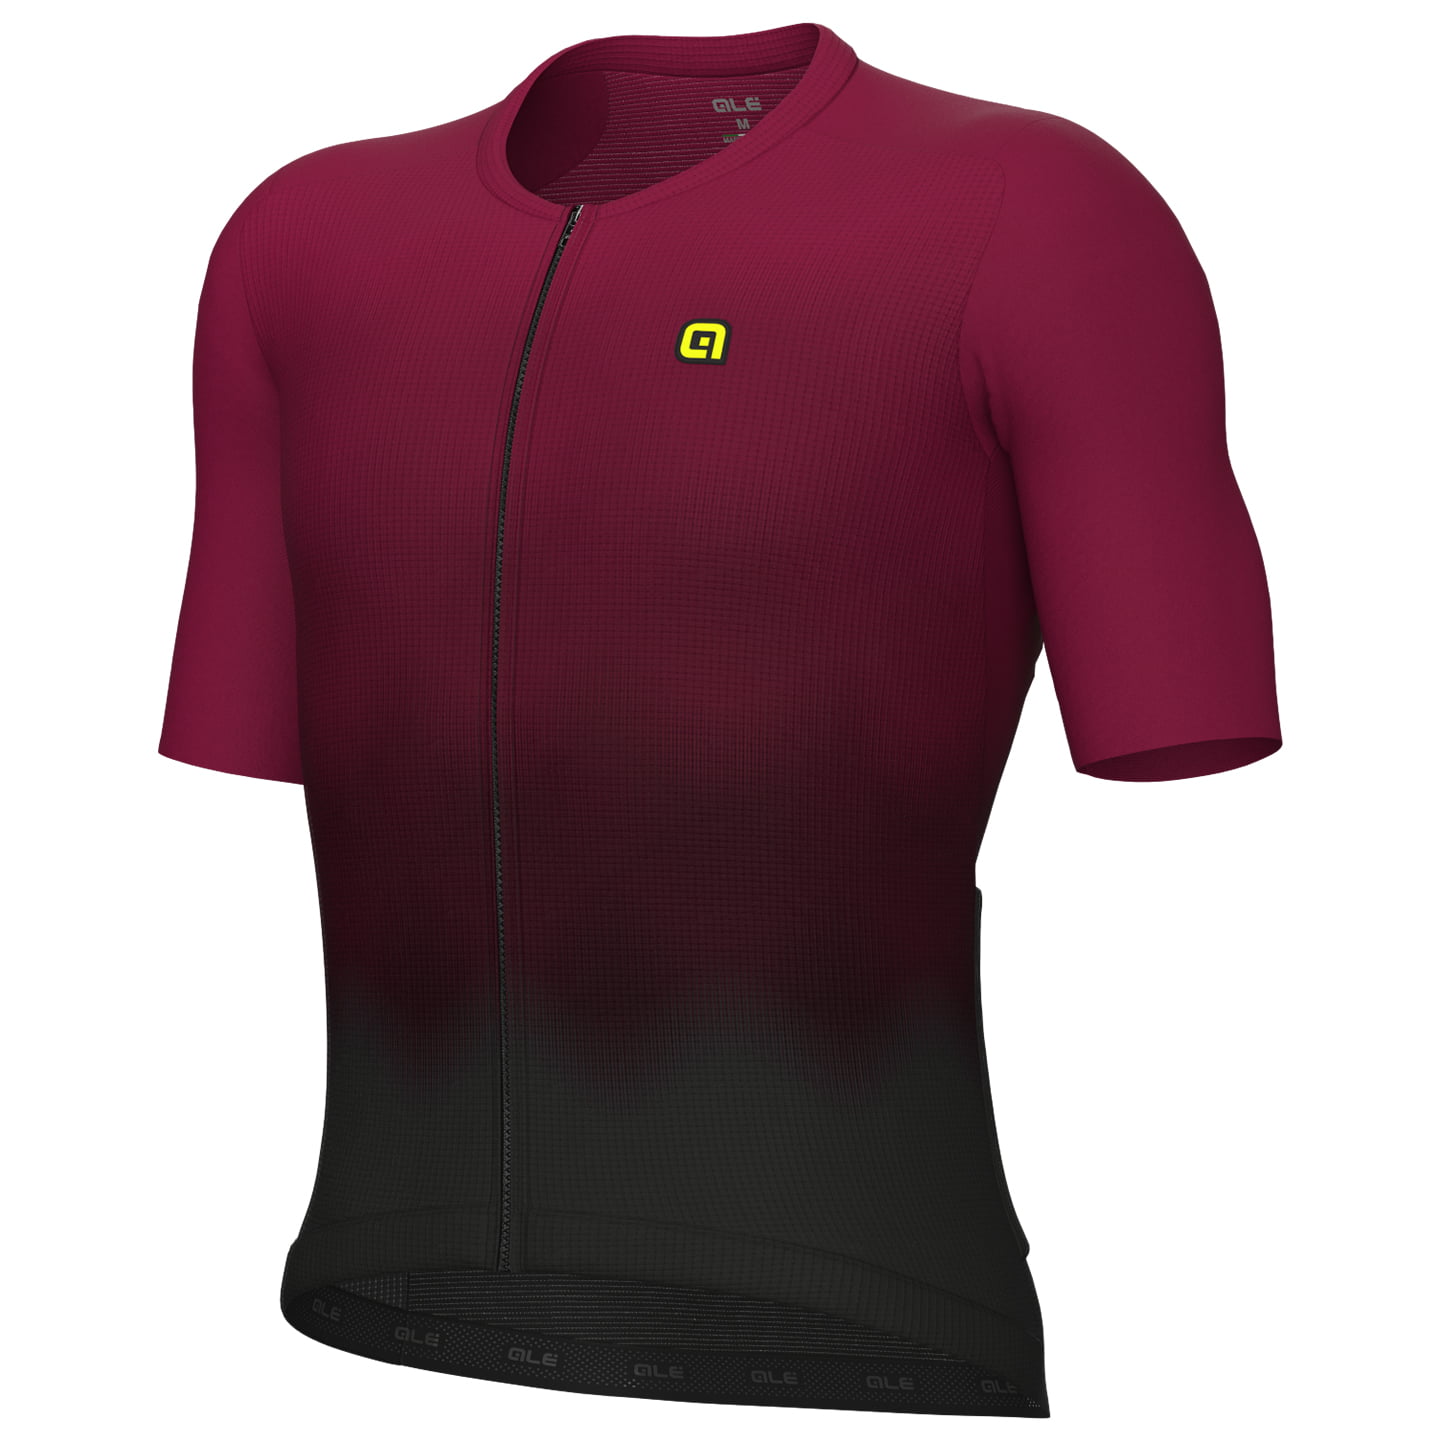 ALE Velocity 2.0 Short Sleeve Jersey, for men, size M, Cycling jersey, Cycling clothing